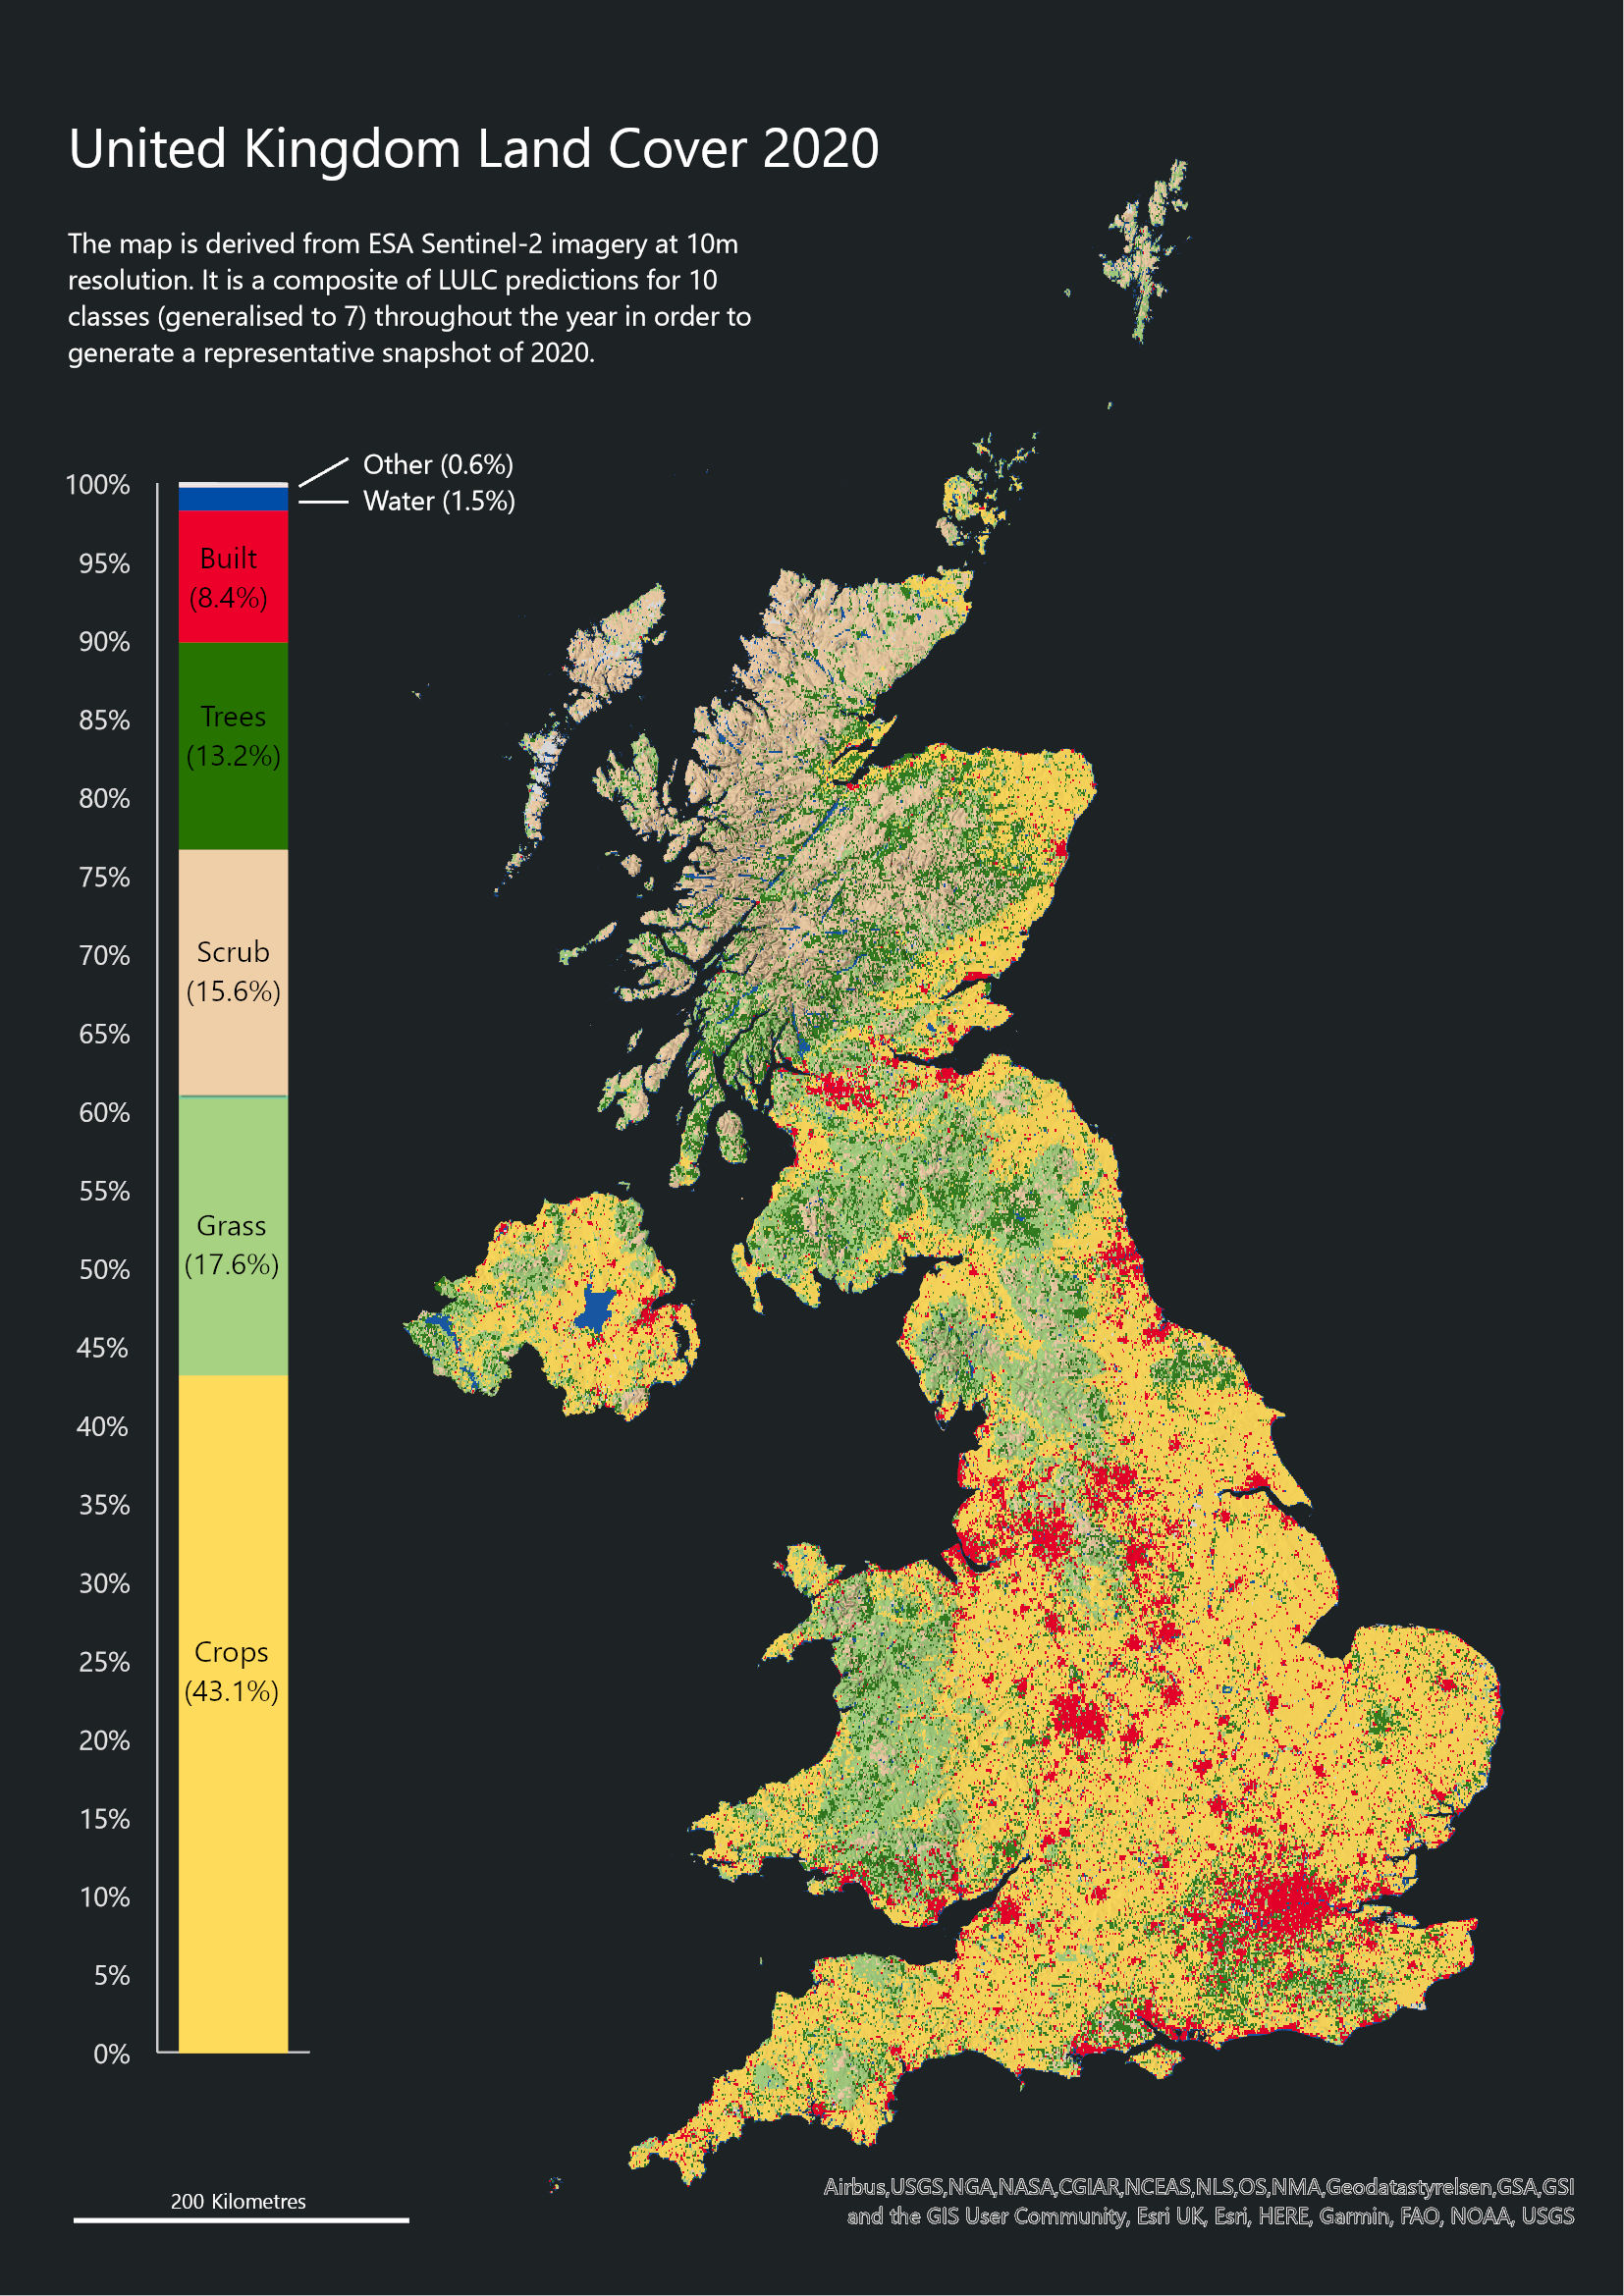 UK Landcover map with percent stacked bar chart